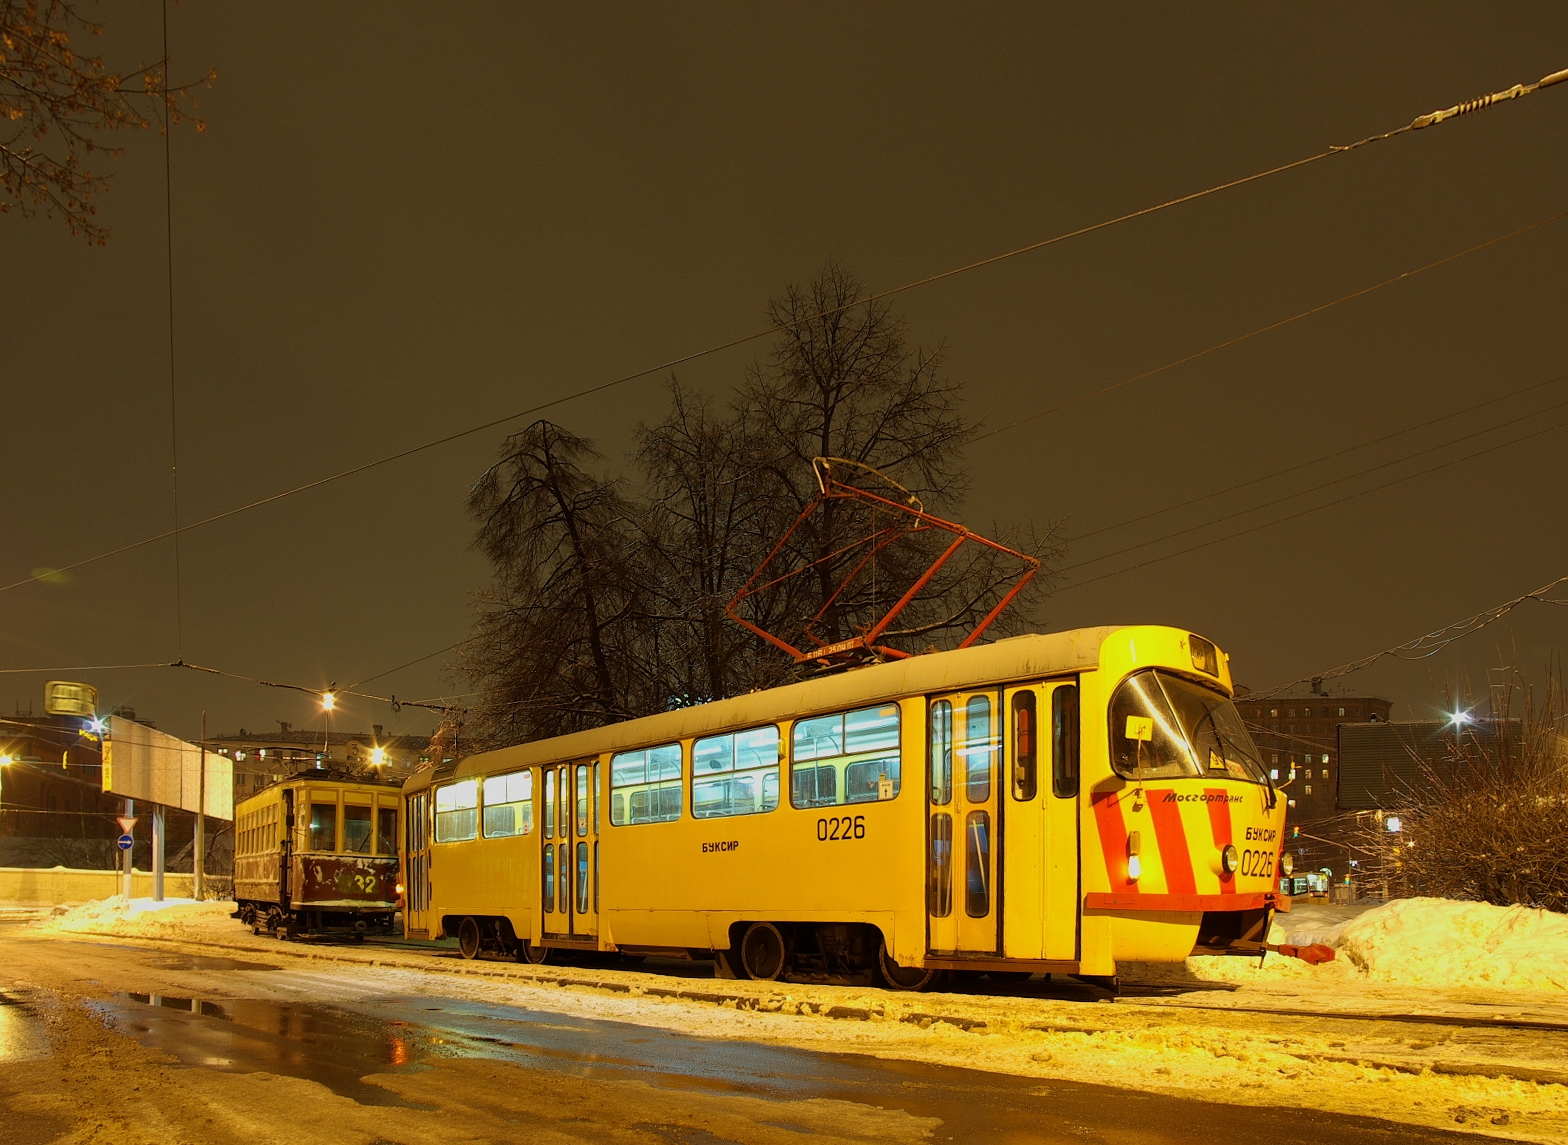 yellow trolley parked on snowy street at night